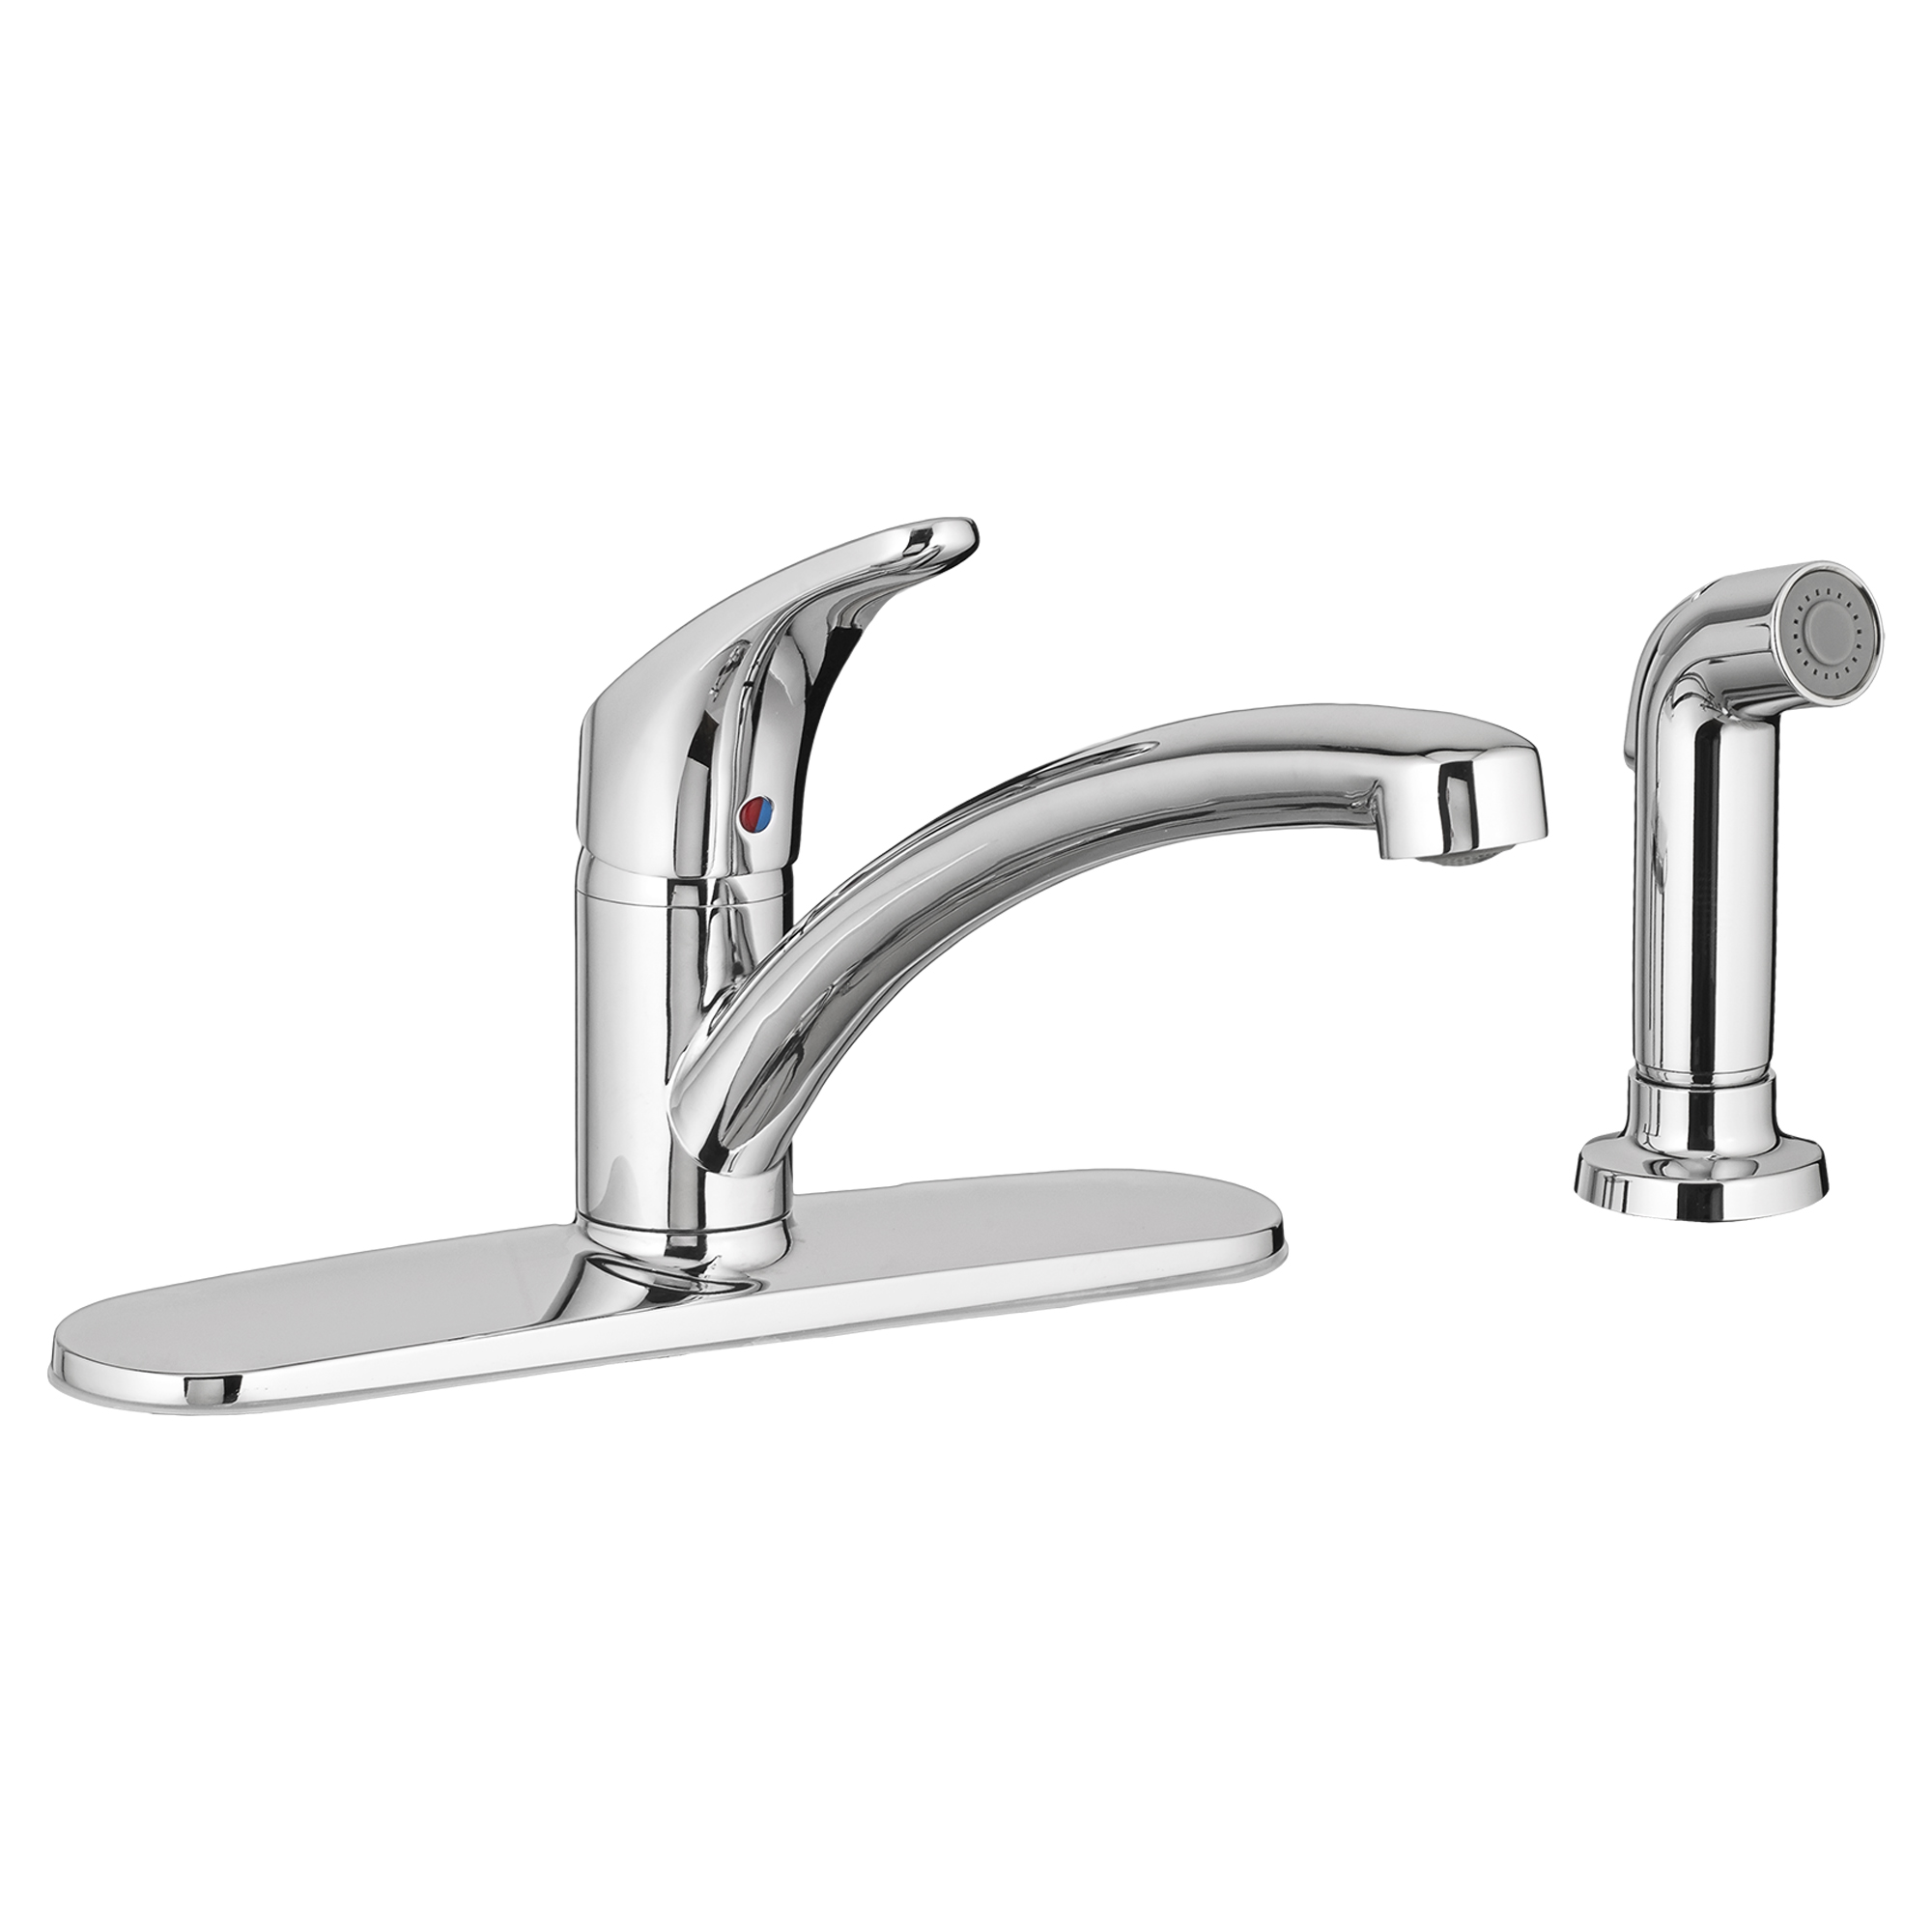 Colony™ PRO Single-Handle Kitchen Faucet 1.5 gpm/5.7 L/min With Side Spray